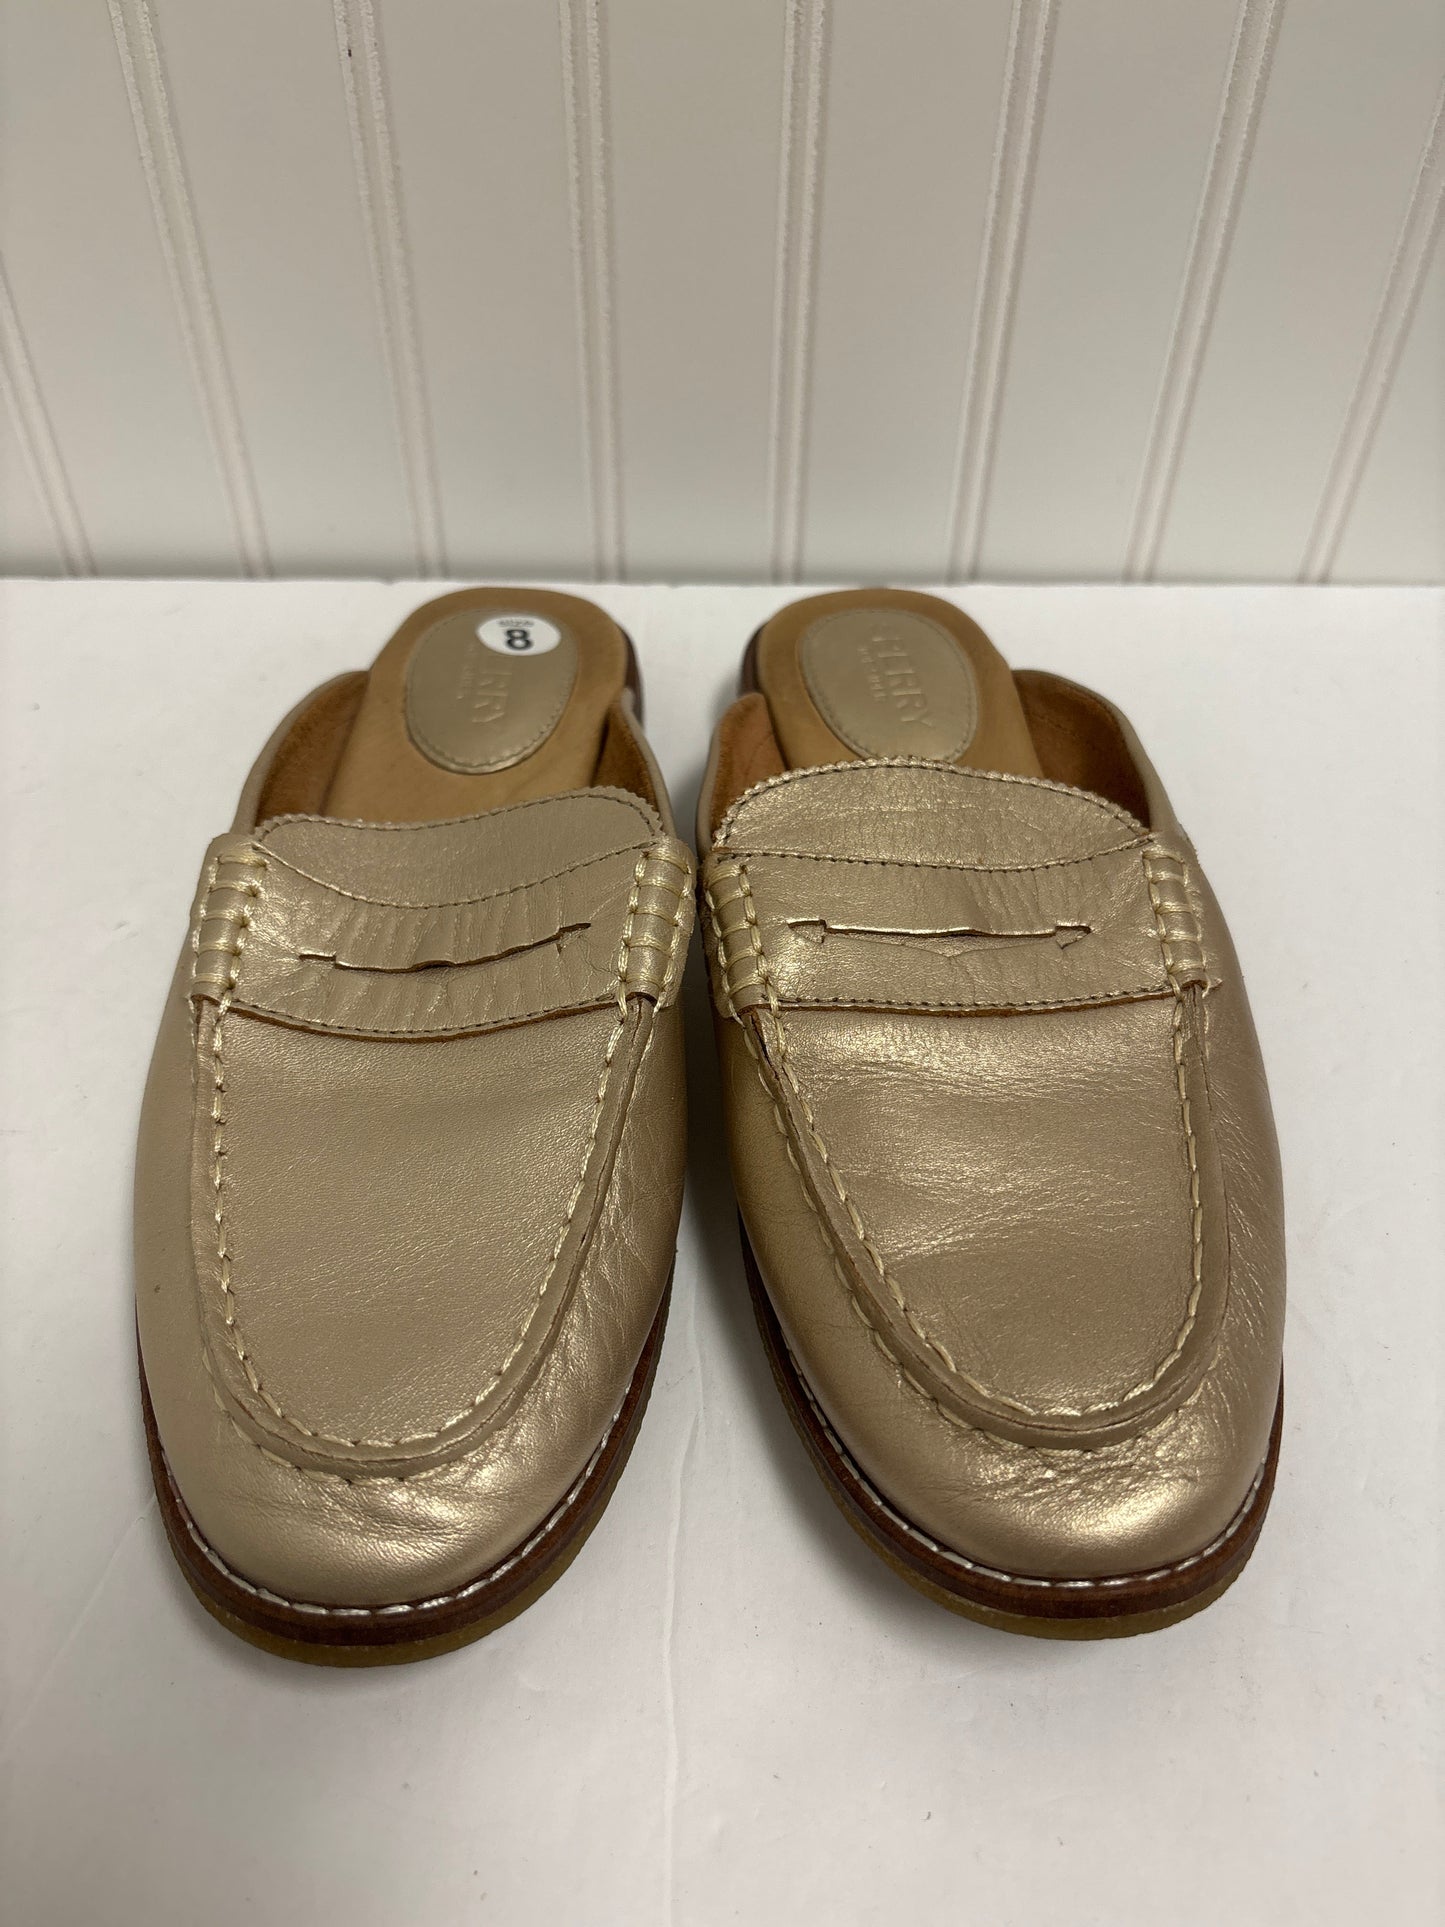 Gold Shoes Flats Sperry, Size 8